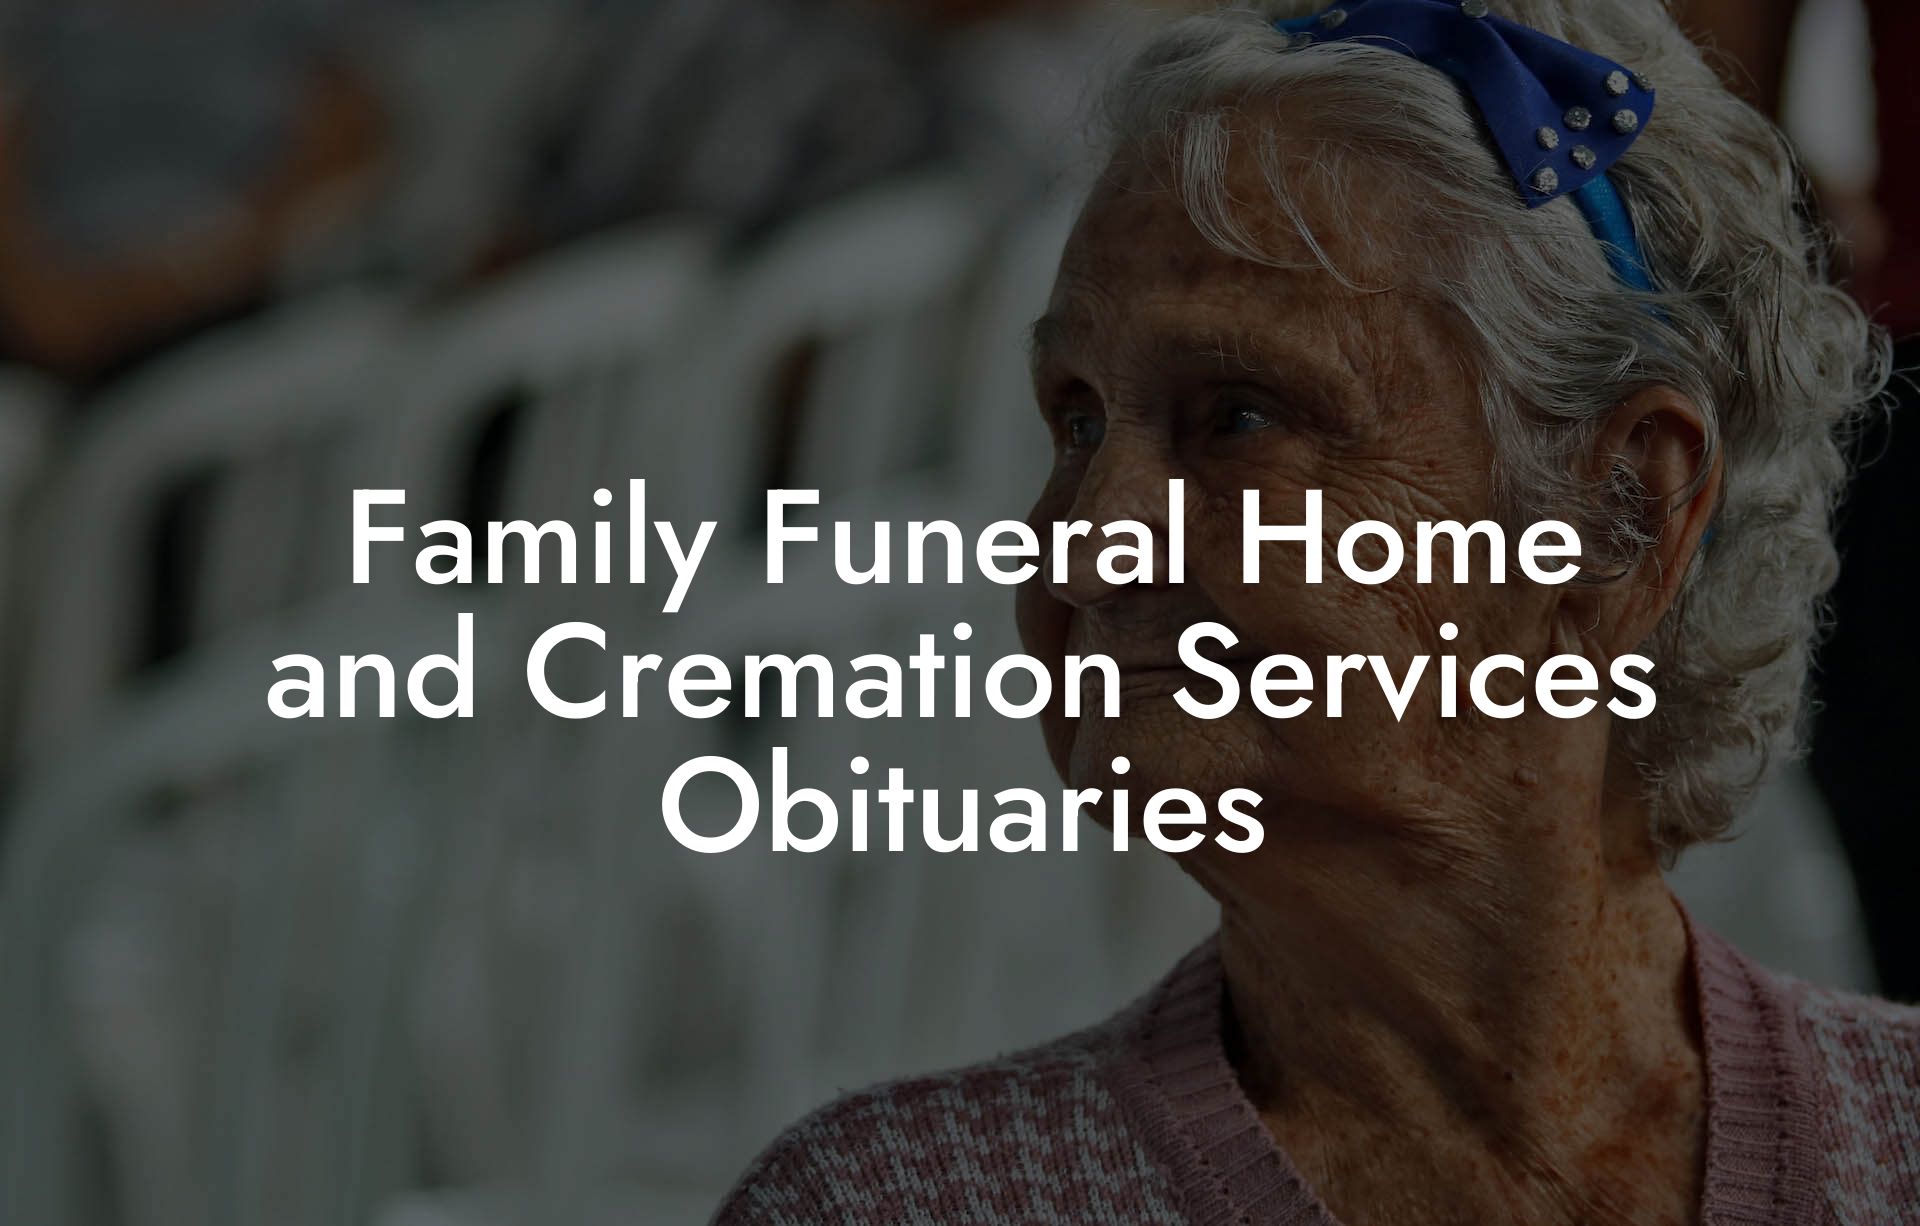 Family Funeral Home and Cremation Services Obituaries - Eulogy Assistant